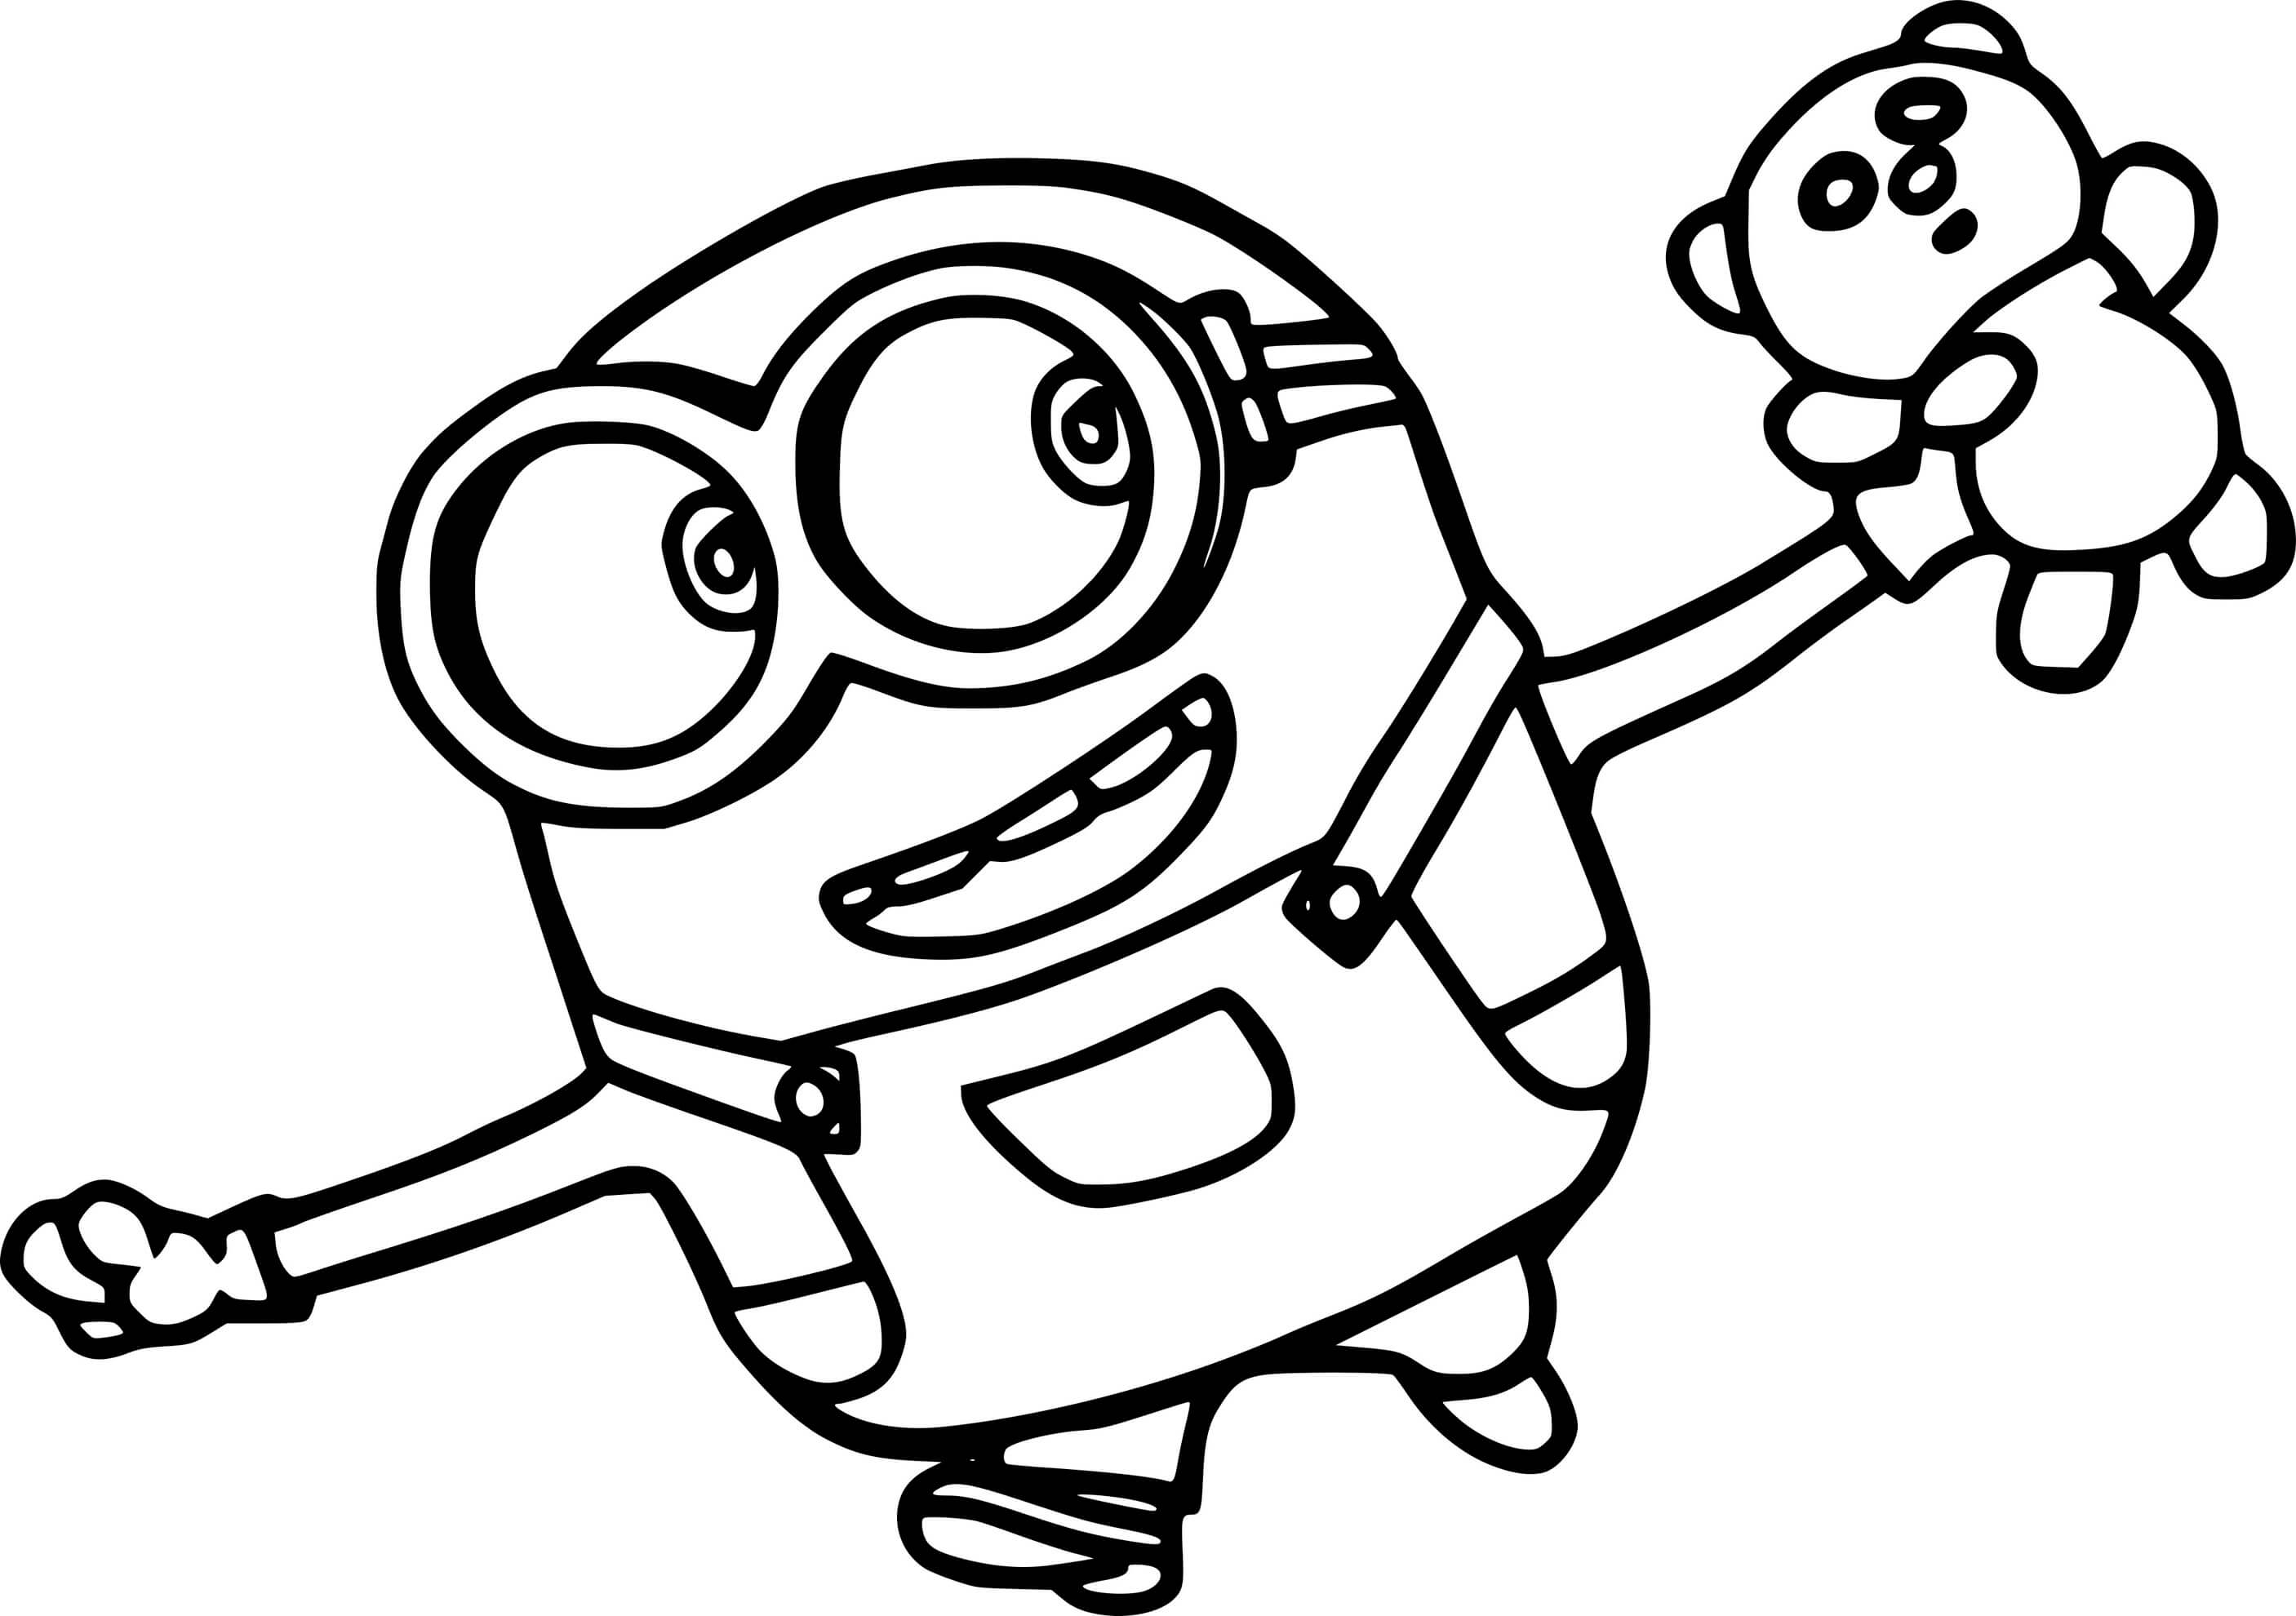 Minion Holds A Teddy Bear Coloring Page